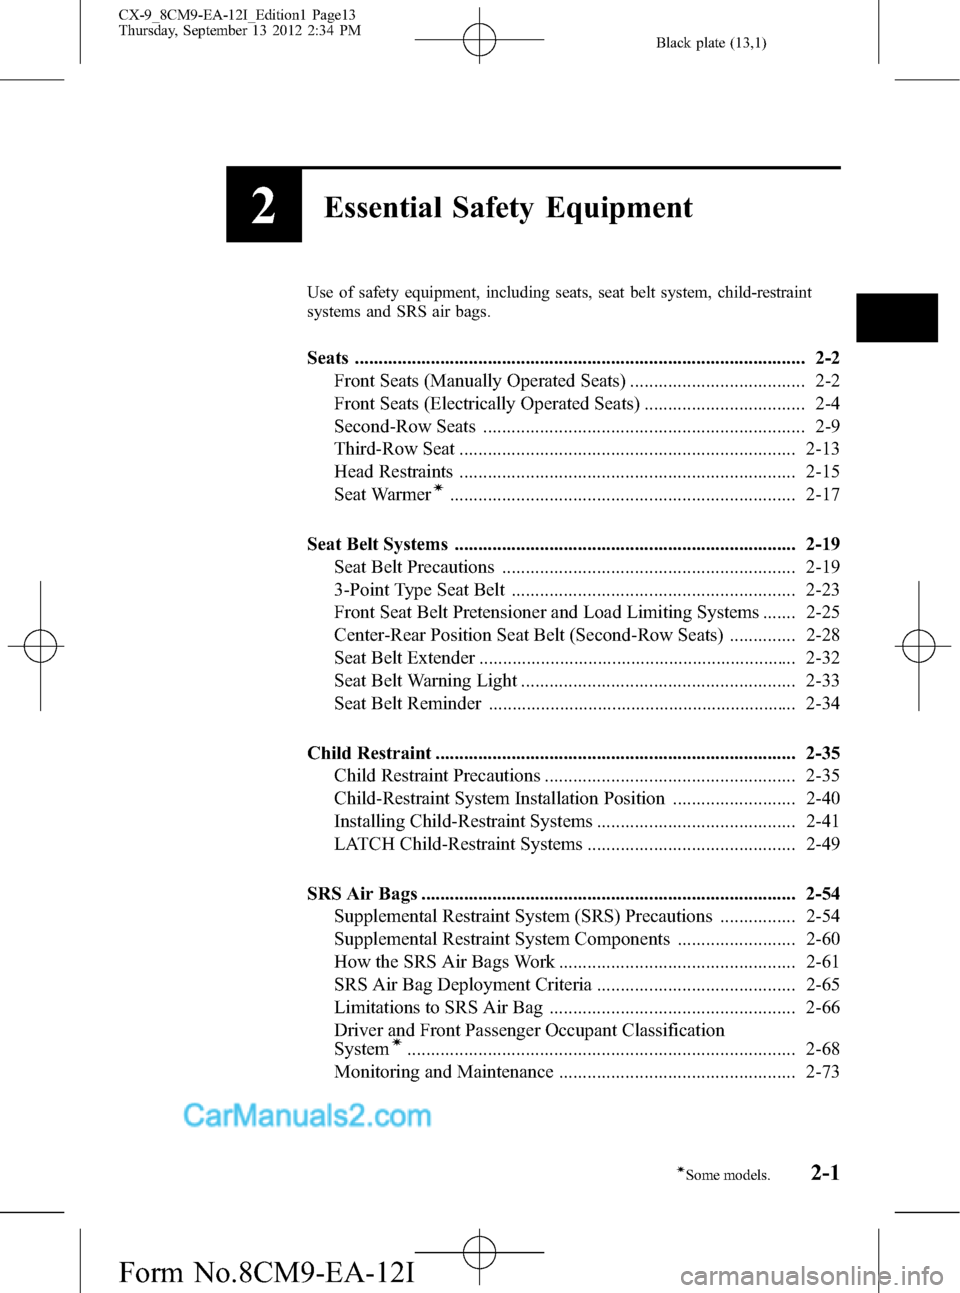 MAZDA MODEL CX-9 2013  Owners Manual (in English) Black plate (13,1)
2Essential Safety Equipment
Use of safety equipment, including seats, seat belt system, child-restraint
systems and SRS air bags.
Seats .............................................